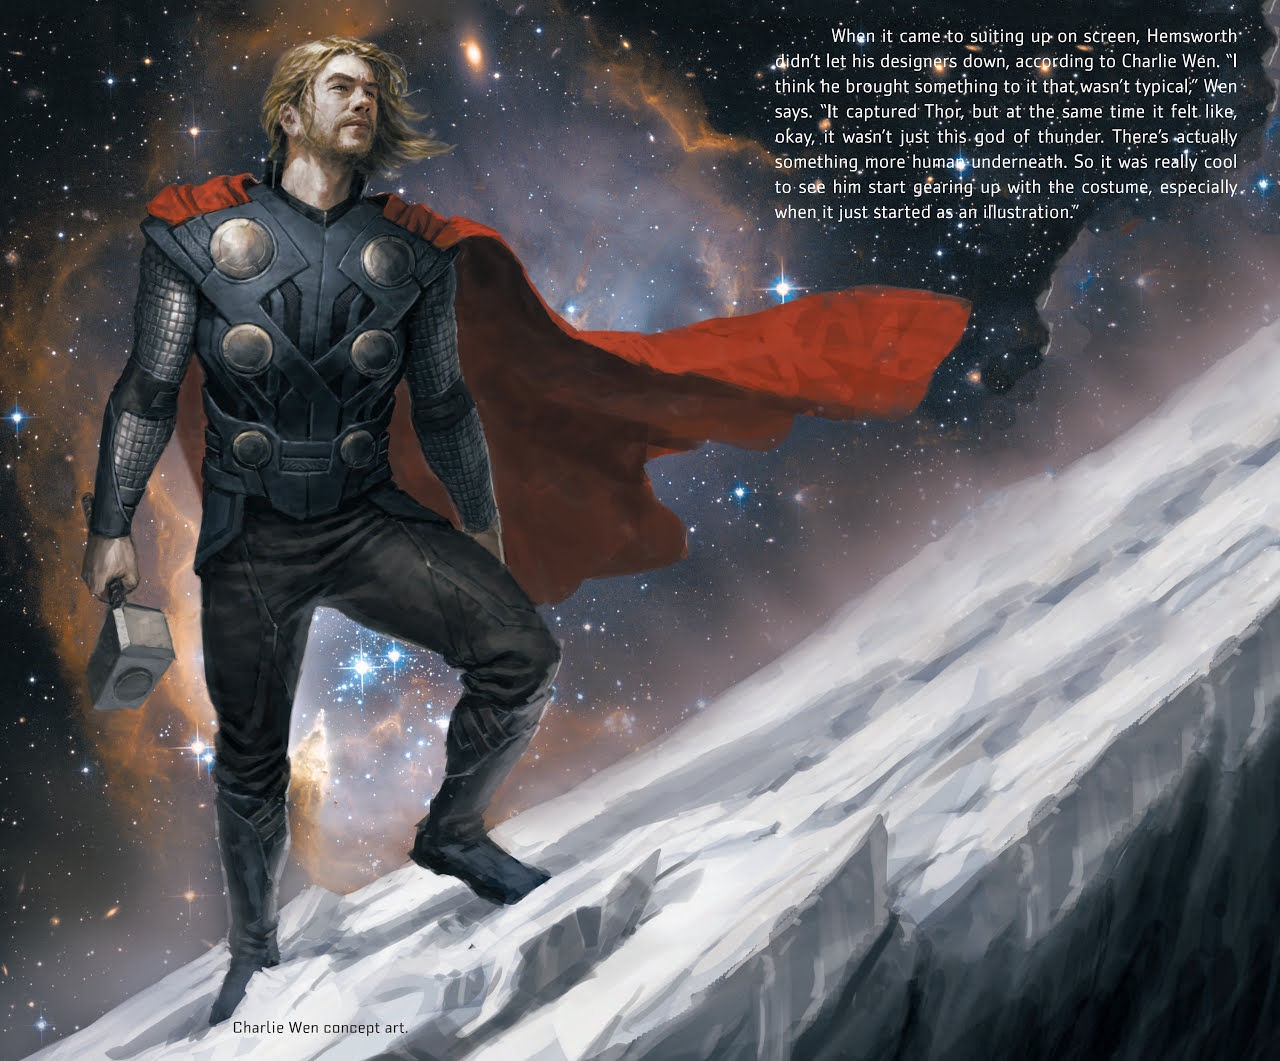 The Road to Marvel's Avengers Age of Ultron - The Art of the Marvel Cinematic Universe 126